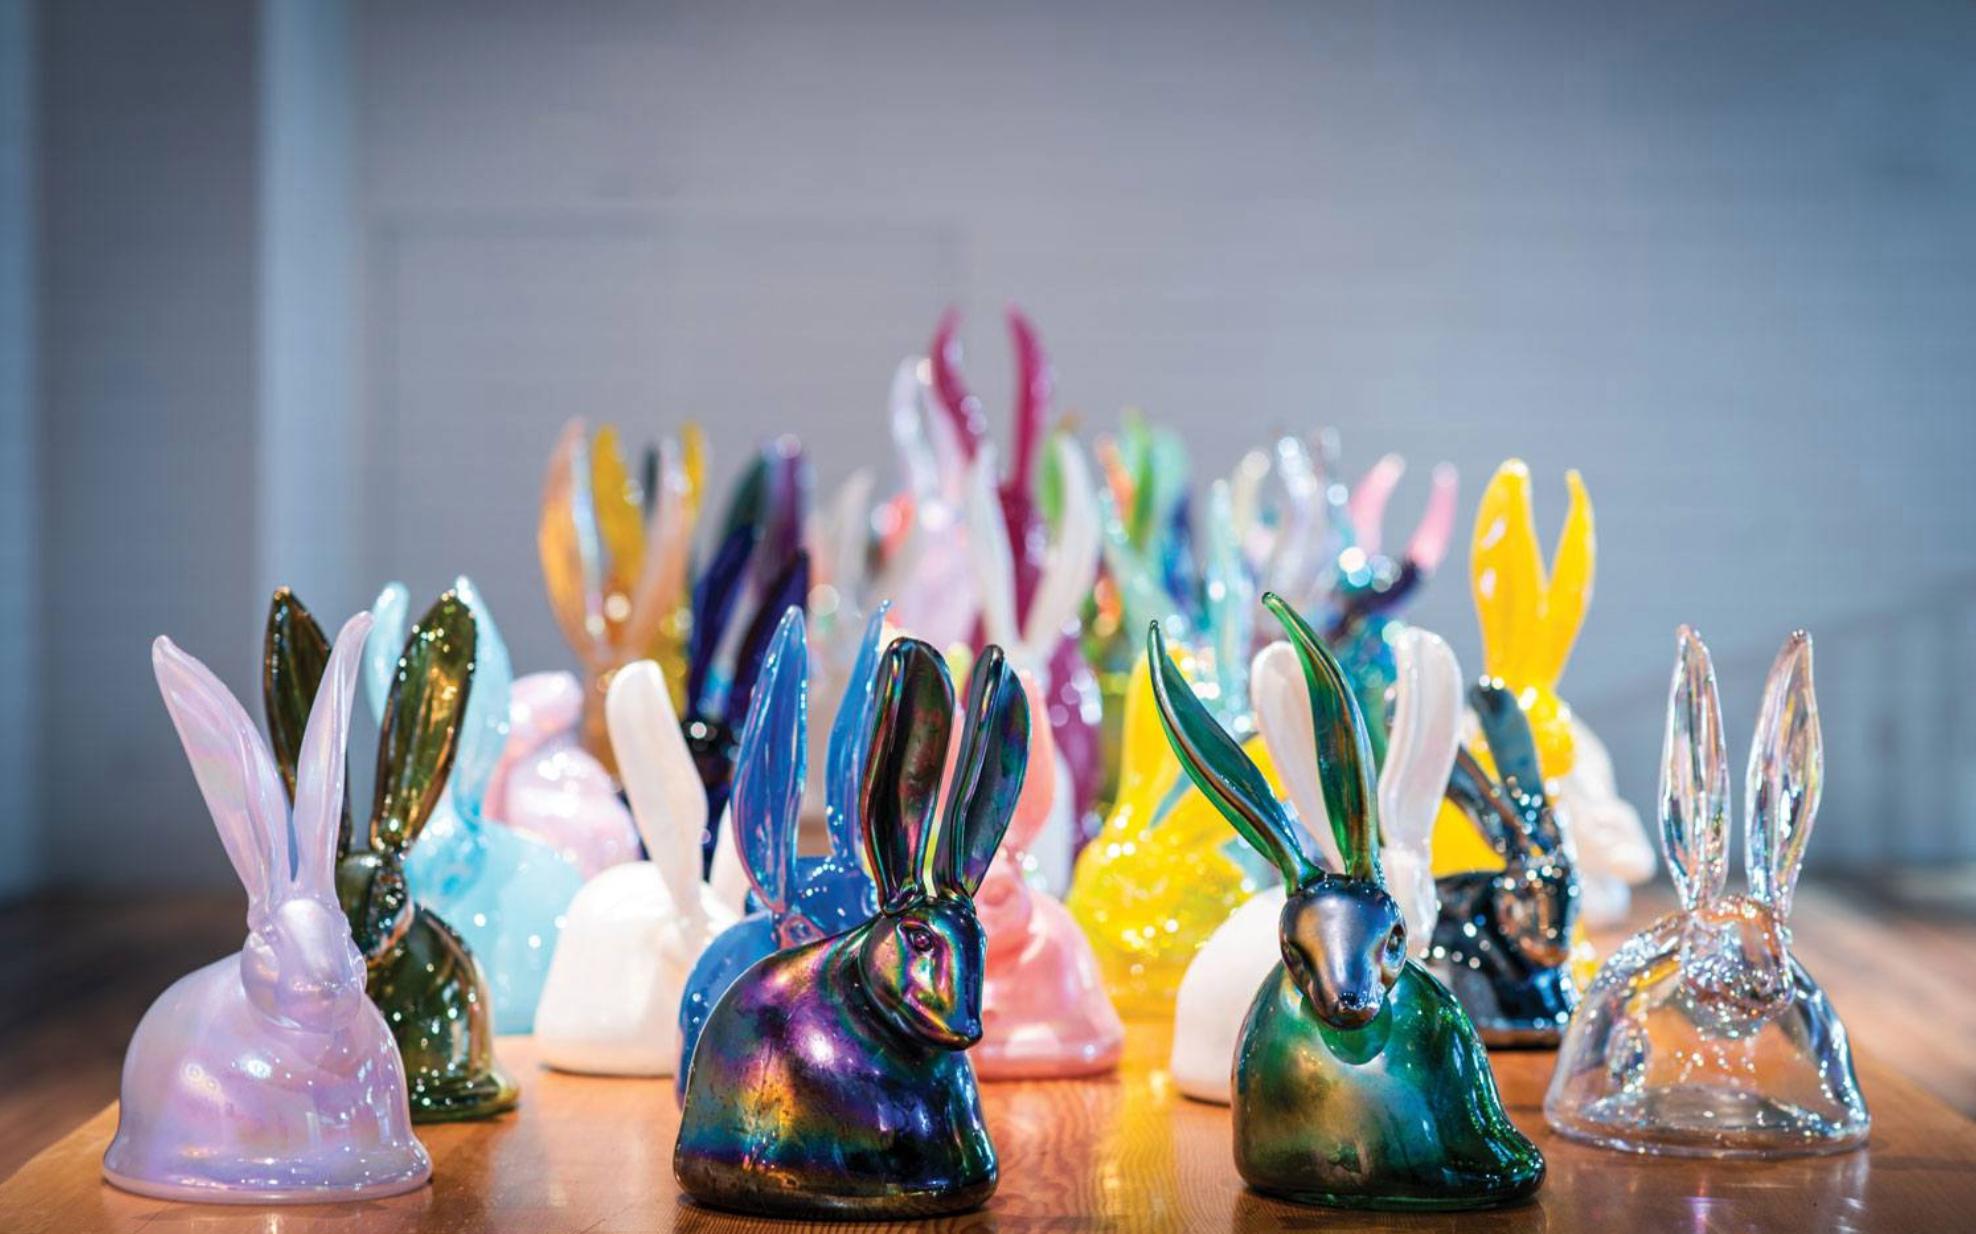 From canvas to kiln, Hunt Slonem brings his signature subject to life like never before. This wonderful hand-blown sculpture depicts one of Slonem's signature bunnies in an iridescent plum-colored glass. Slonem’s new blown-glass sculptures are a